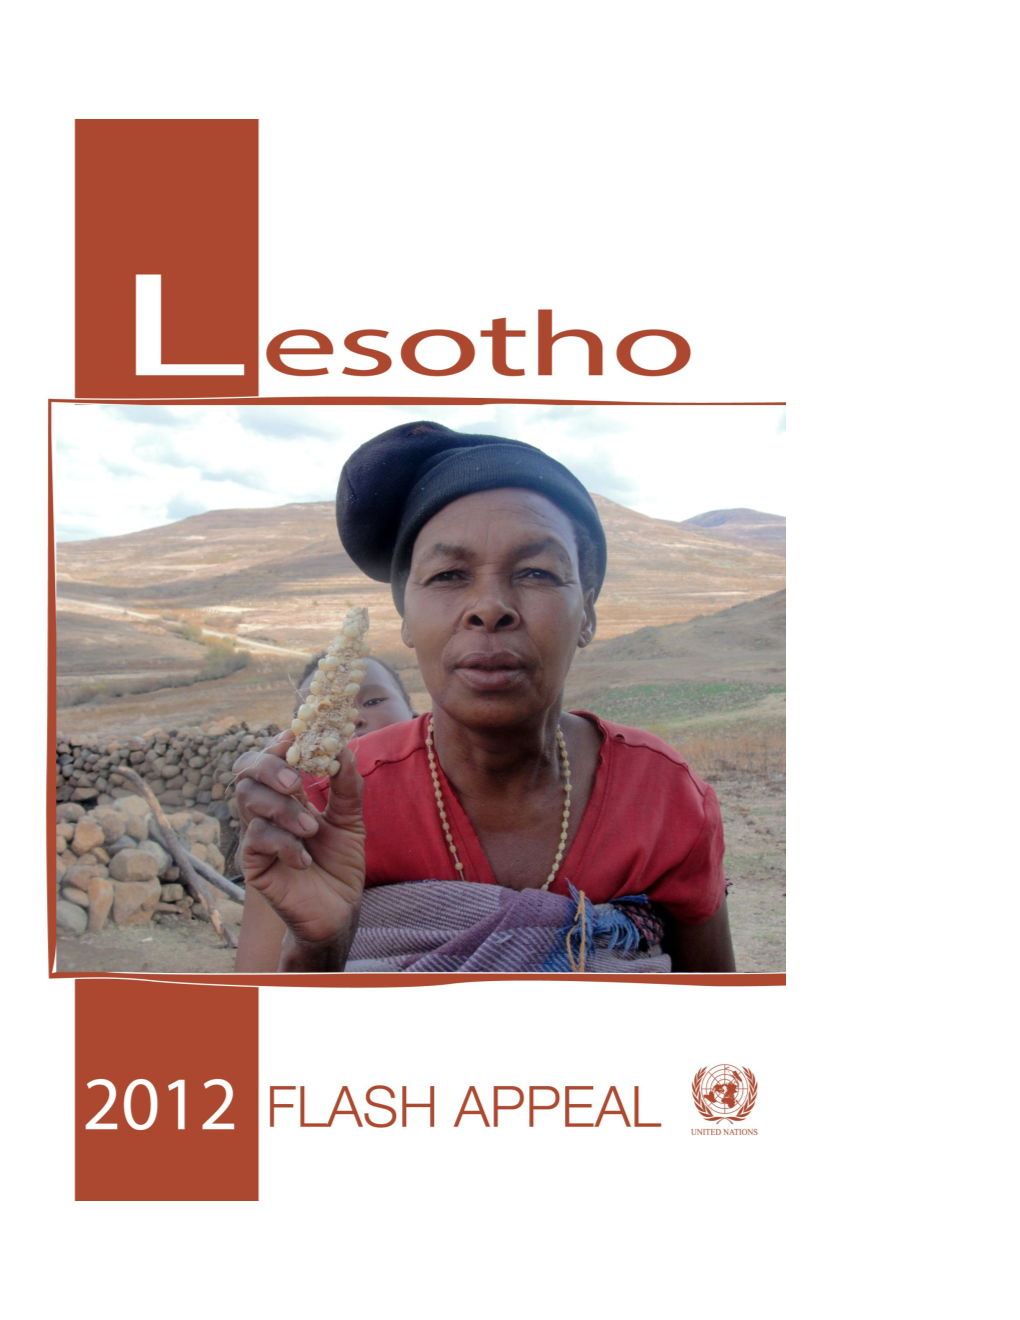 Flash Appeal for Lesotho 2012